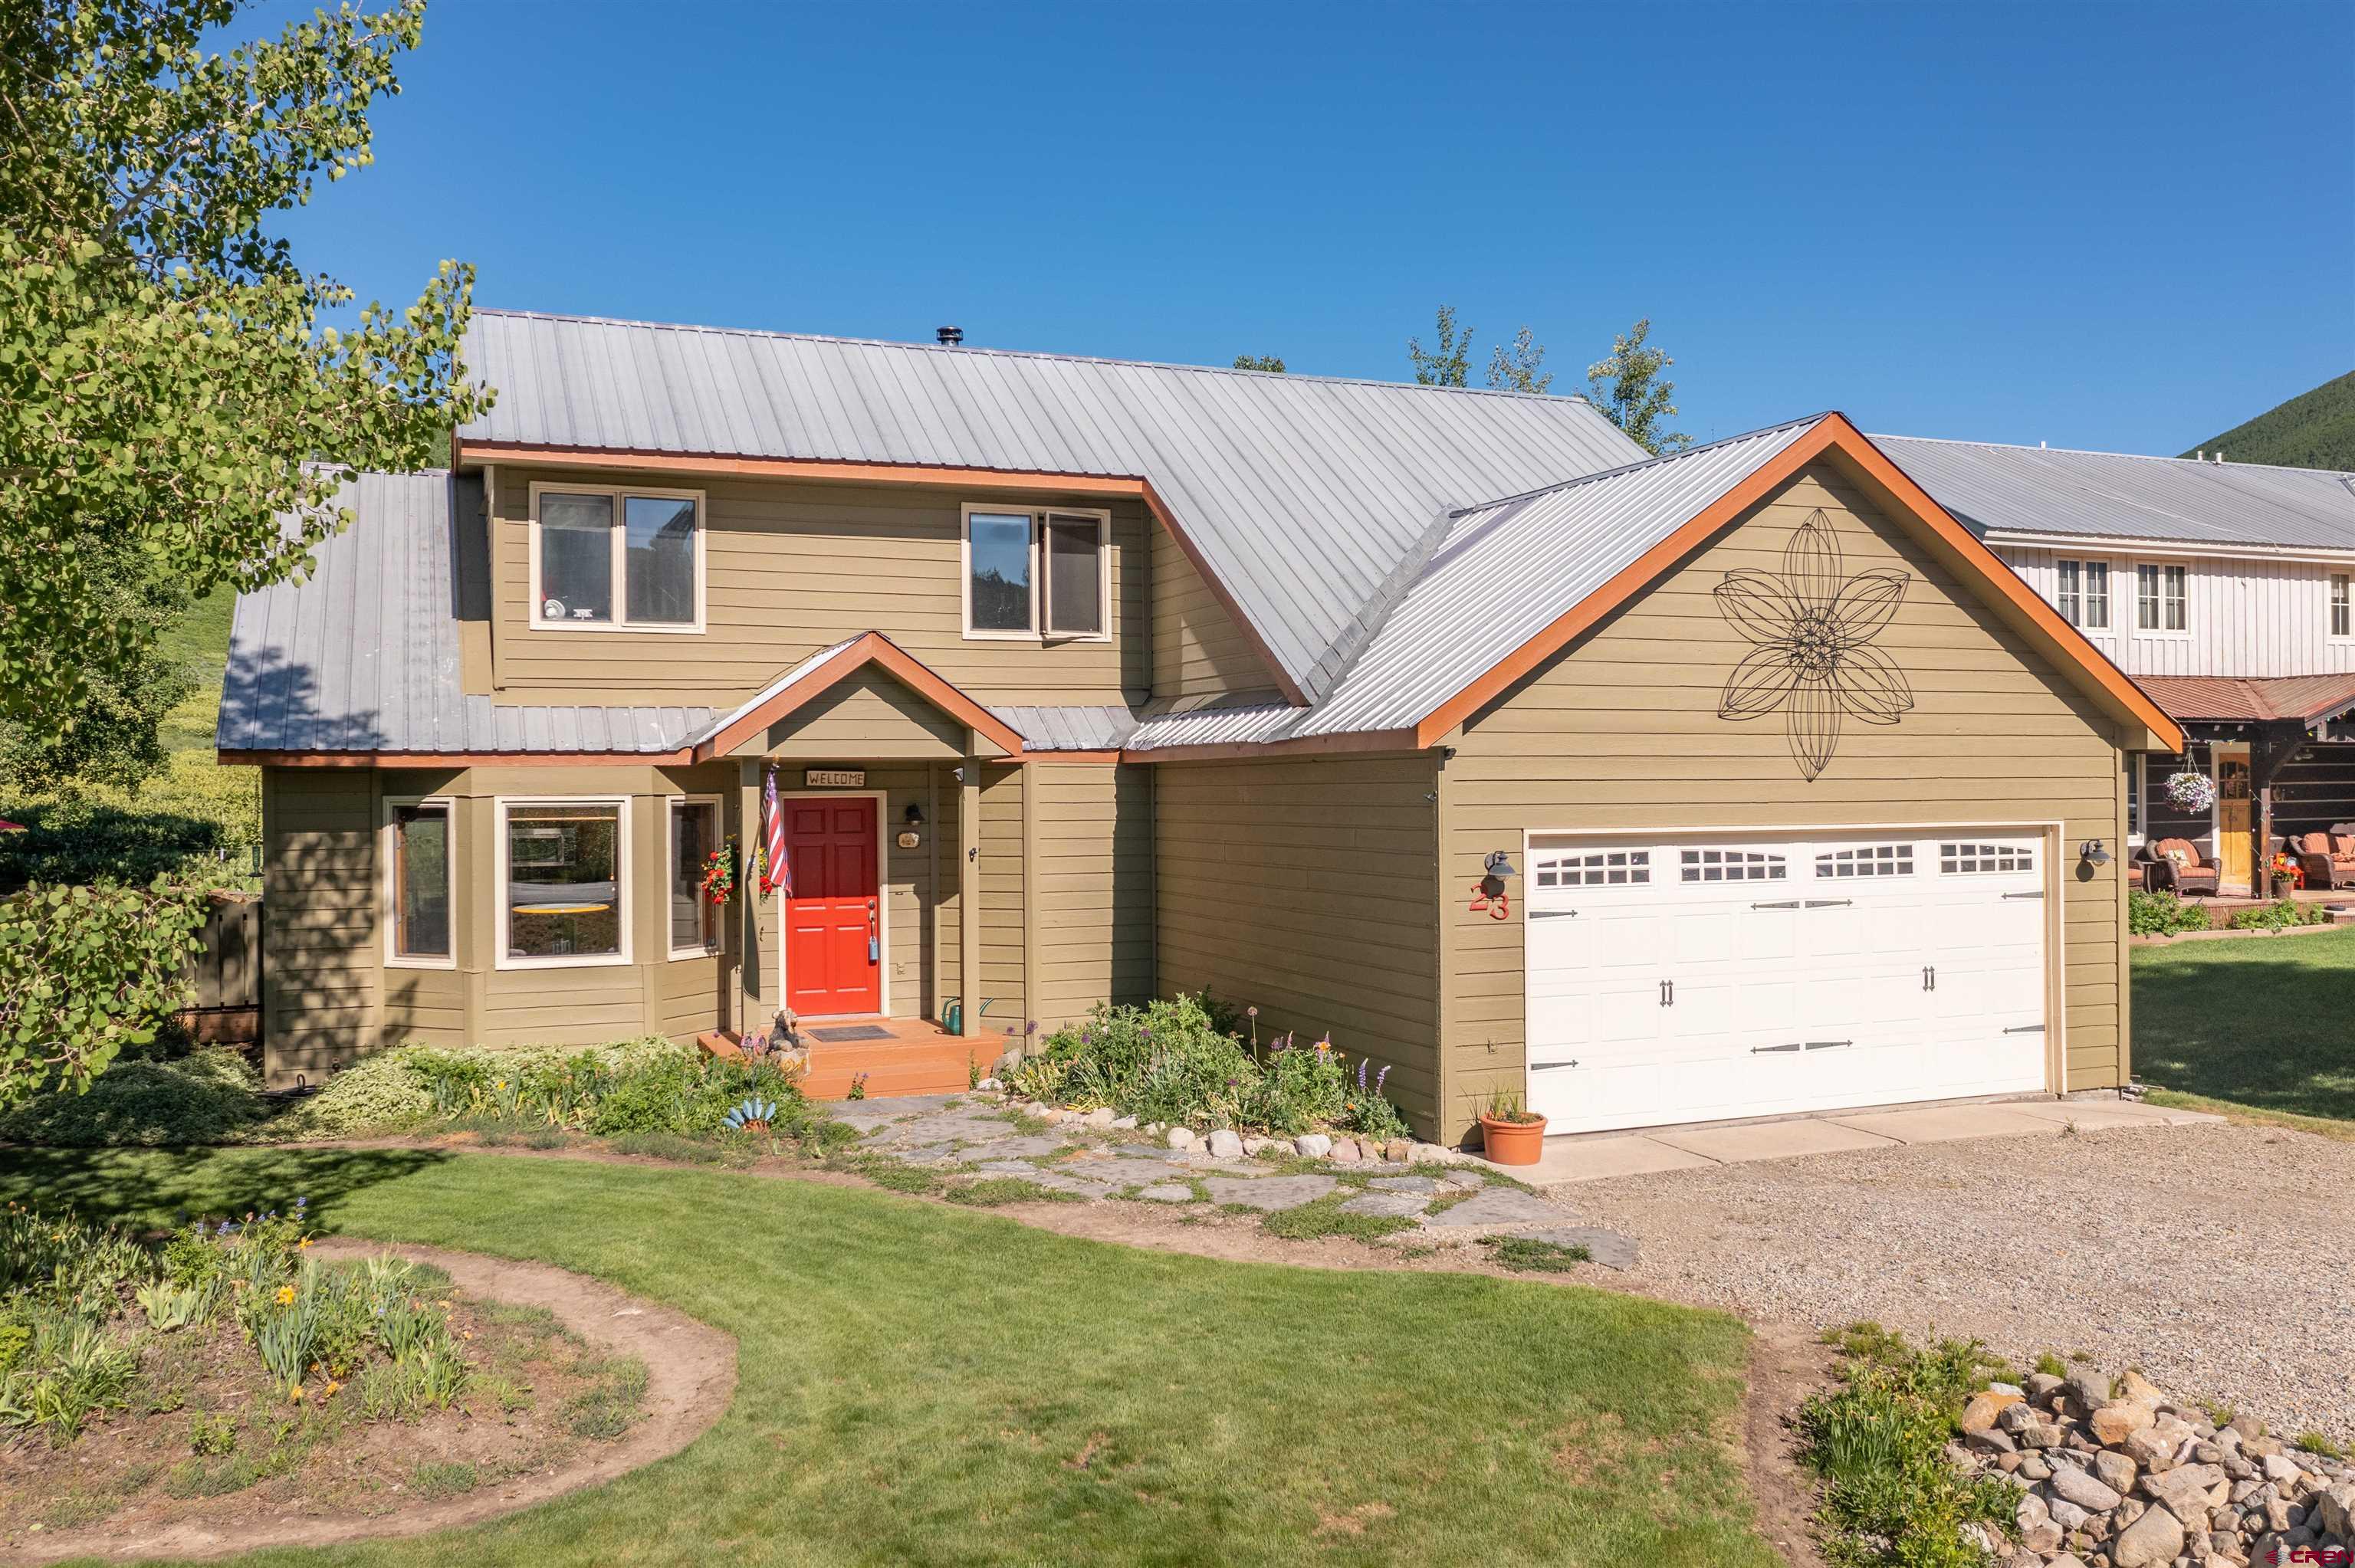 23 Paradise Road, Mt. Crested Butte, CO 81225